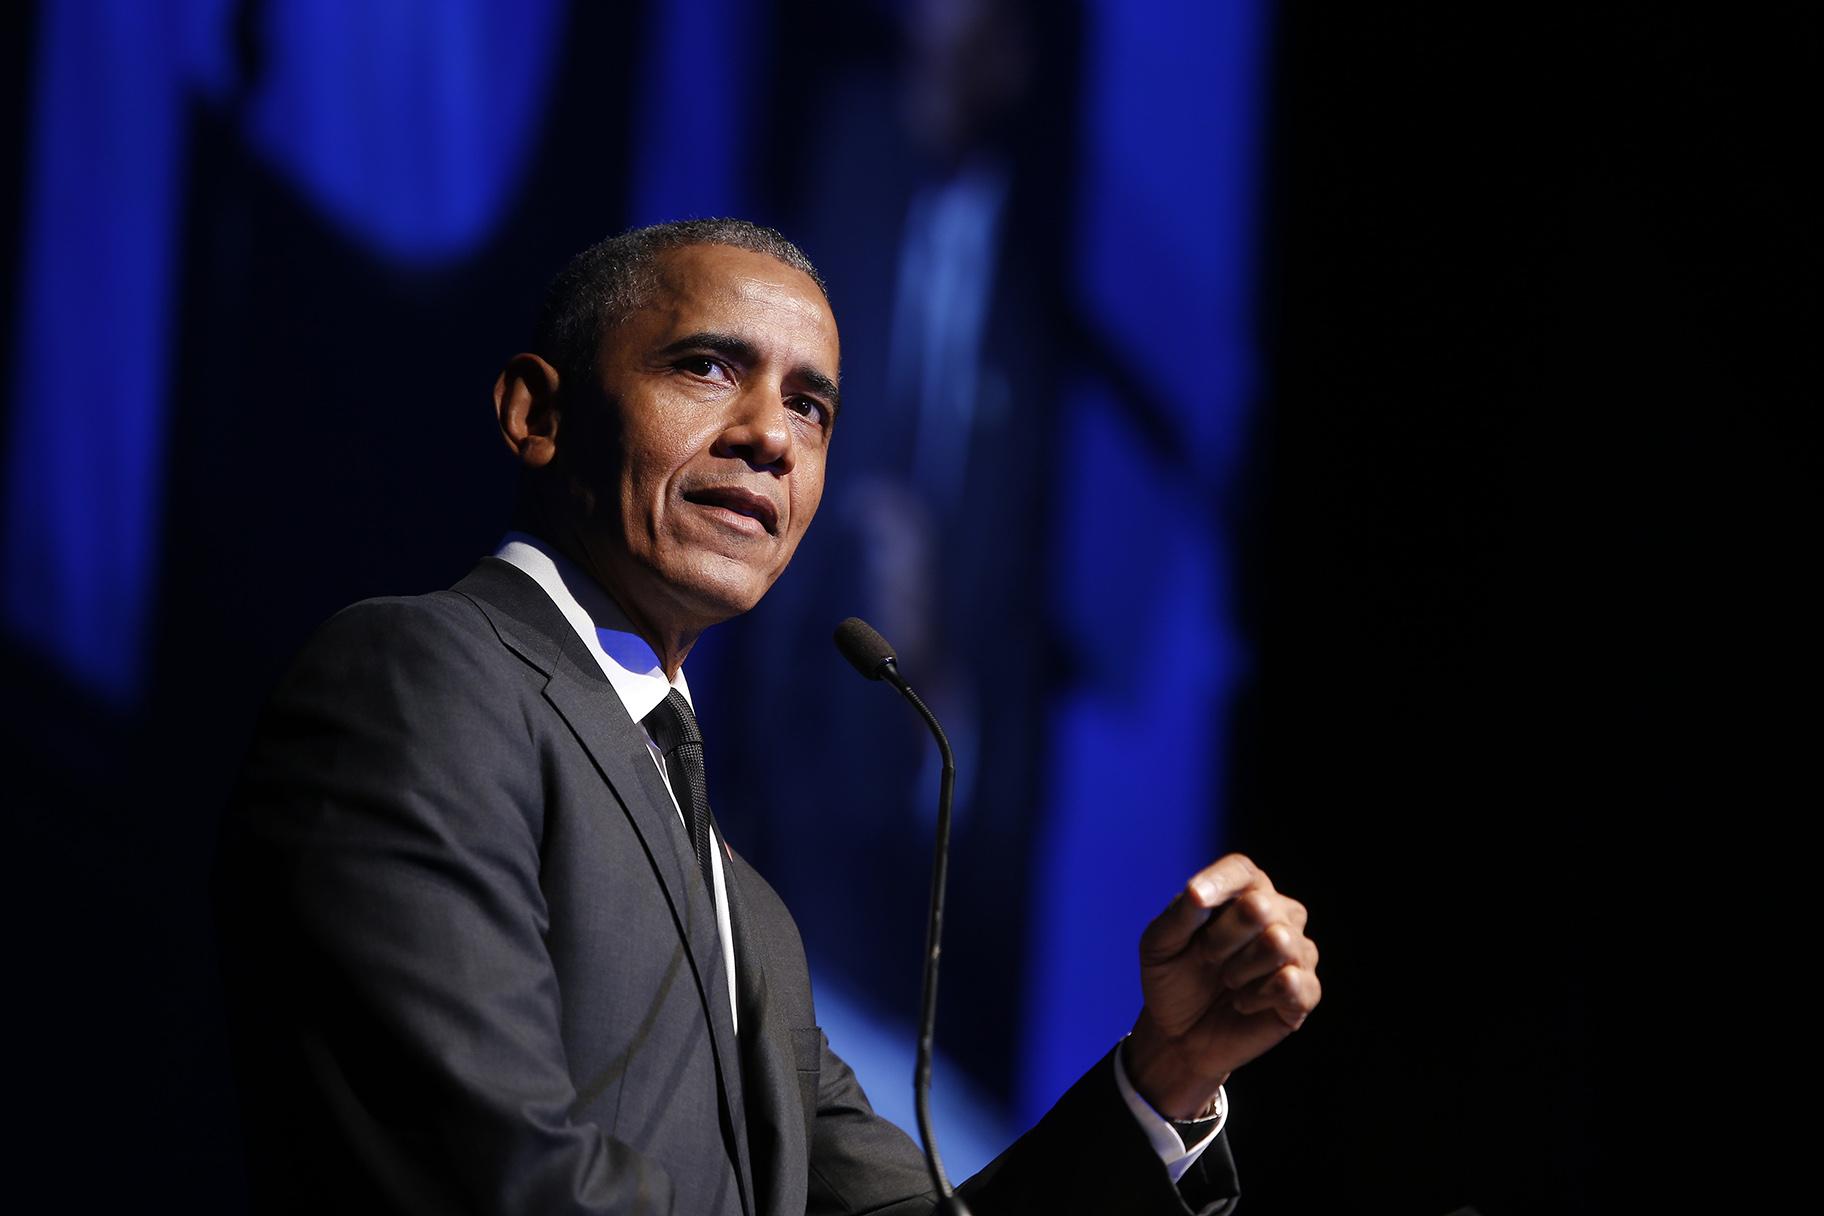 In this Dec. 12, 2018, file photo former President Barack Obama accepts the Robert F. Kennedy Human Rights Ripple of Hope Award at a ceremony in New York. (AP Photo / Jason DeCrow, File)